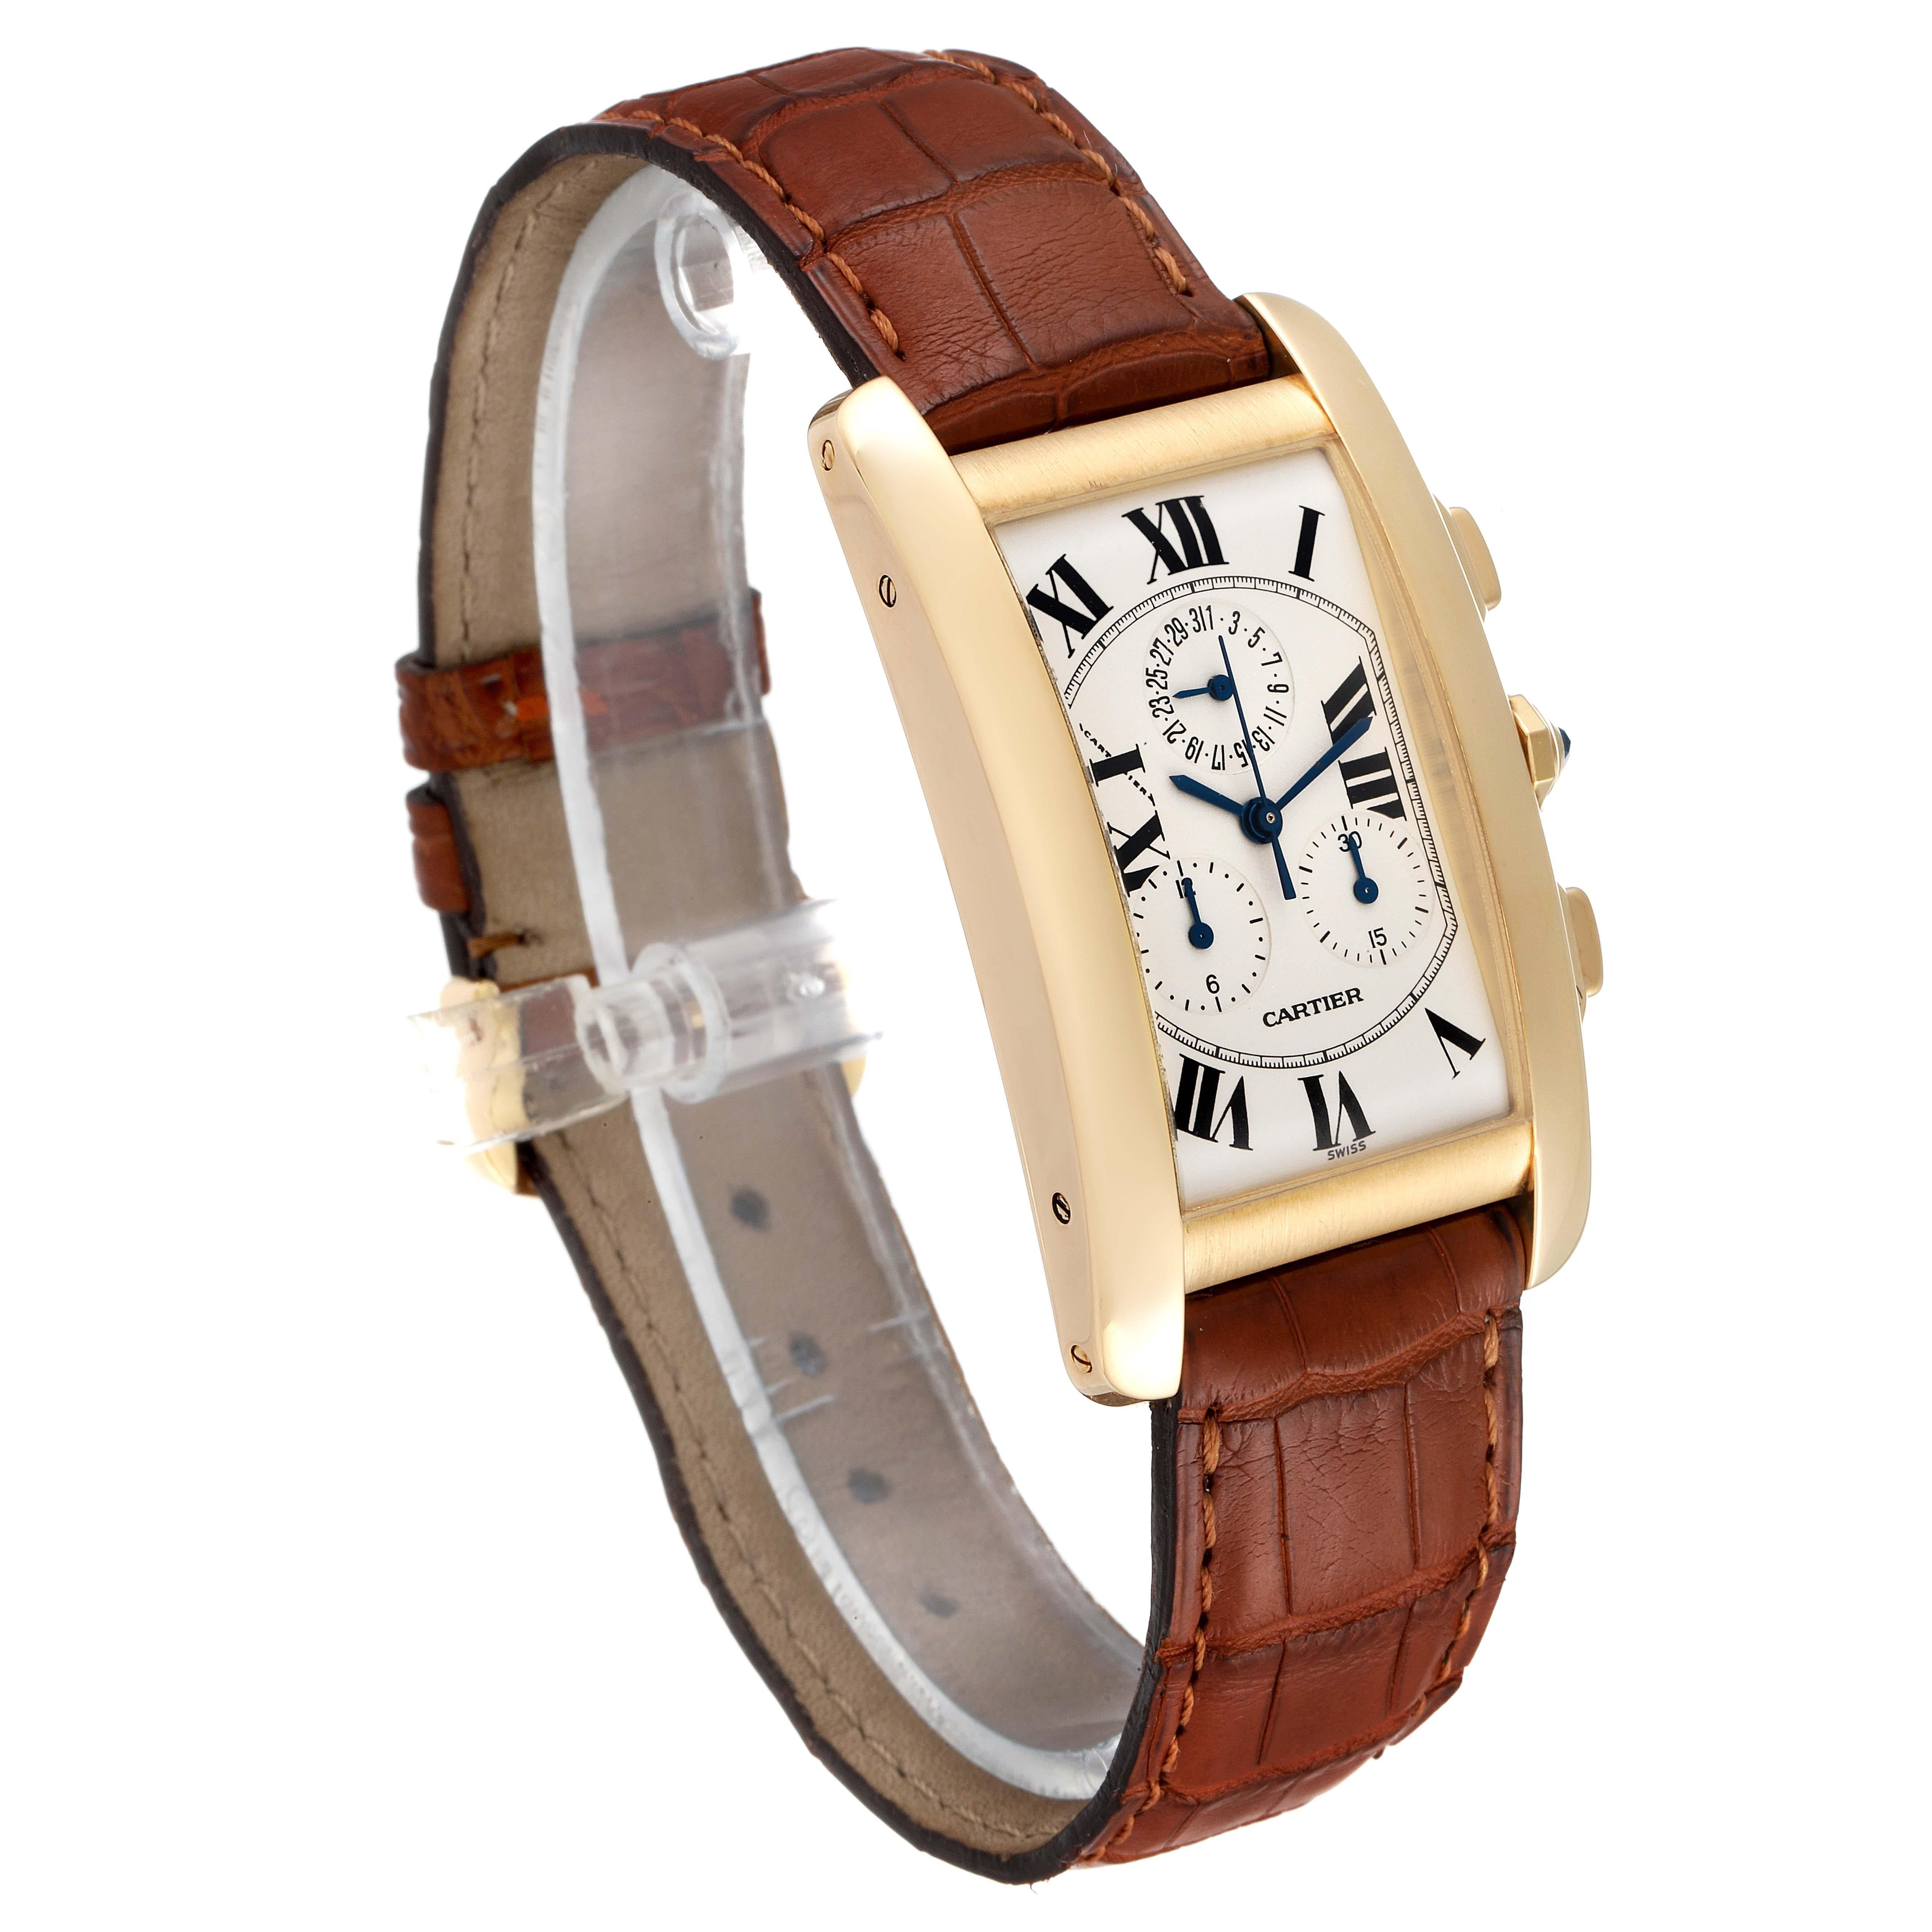 Cartier Tank Americaine Chronograph Yellow Gold Mens Watch W2601156 In Excellent Condition For Sale In Atlanta, GA